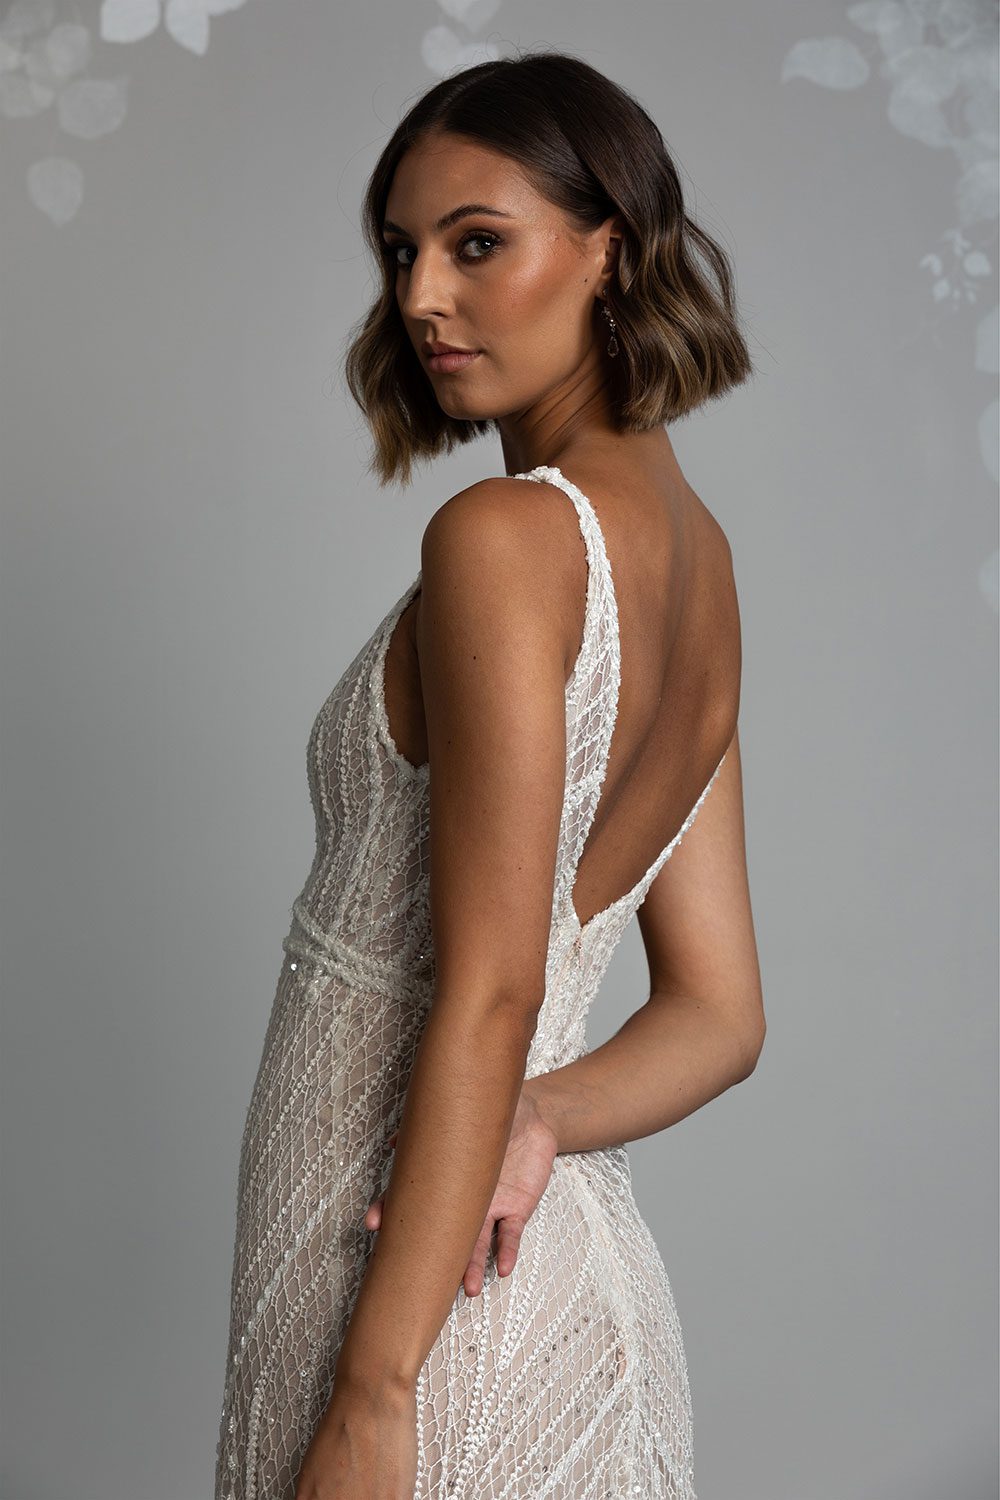 Alexia Wedding Dress by Vinka Design. Featuring a plunging V-neckline and low V-back, this bridal look balances femininity with daring design. Crafted on a nude base, the ivory and silver beads glimmer with movement as they catch light while the lined lace design elongates the female form to perfection. The effortlessly chic sheath skirt falls gently from the waist into a delicate and discreet train. Close up of profile view of model wearing low V back semi sheer beaded lace gown